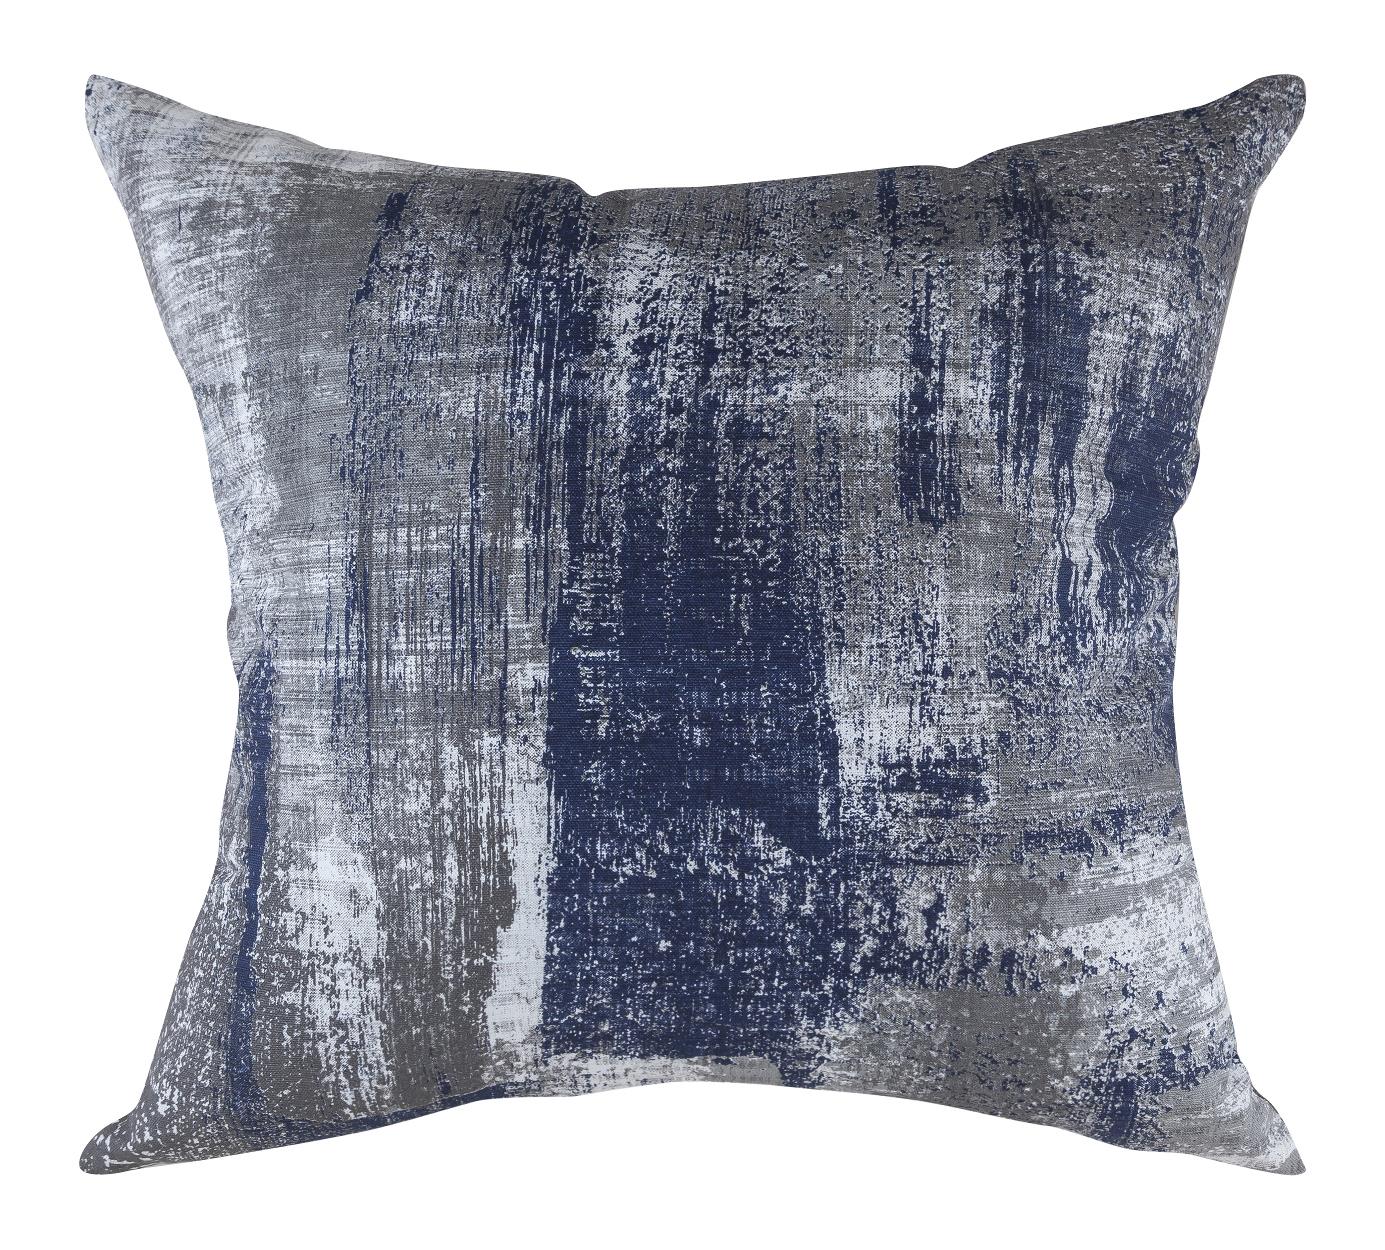 Brush Art Accent Decorative Throw Pillow Covers (Pack of 2) - TreeWool